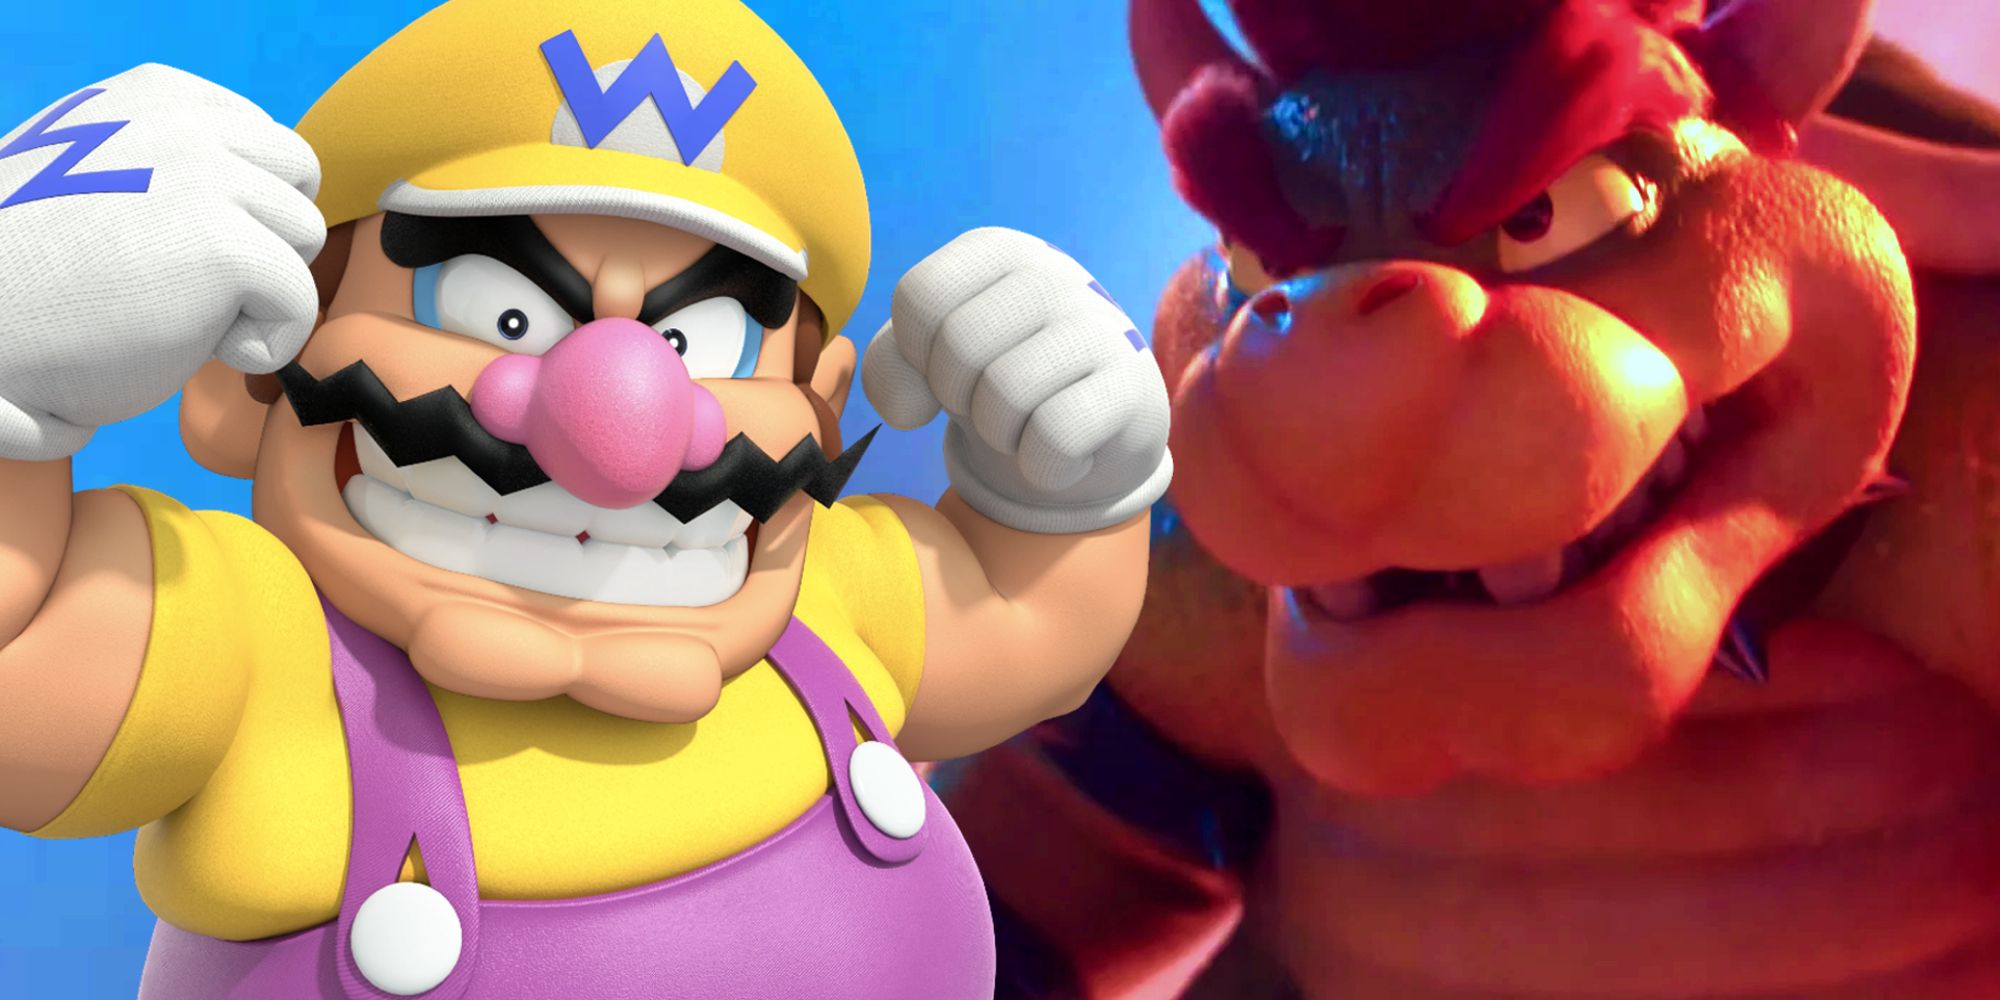 Wario juxtaposed with Bowser from The Super Mario Bros. Movie